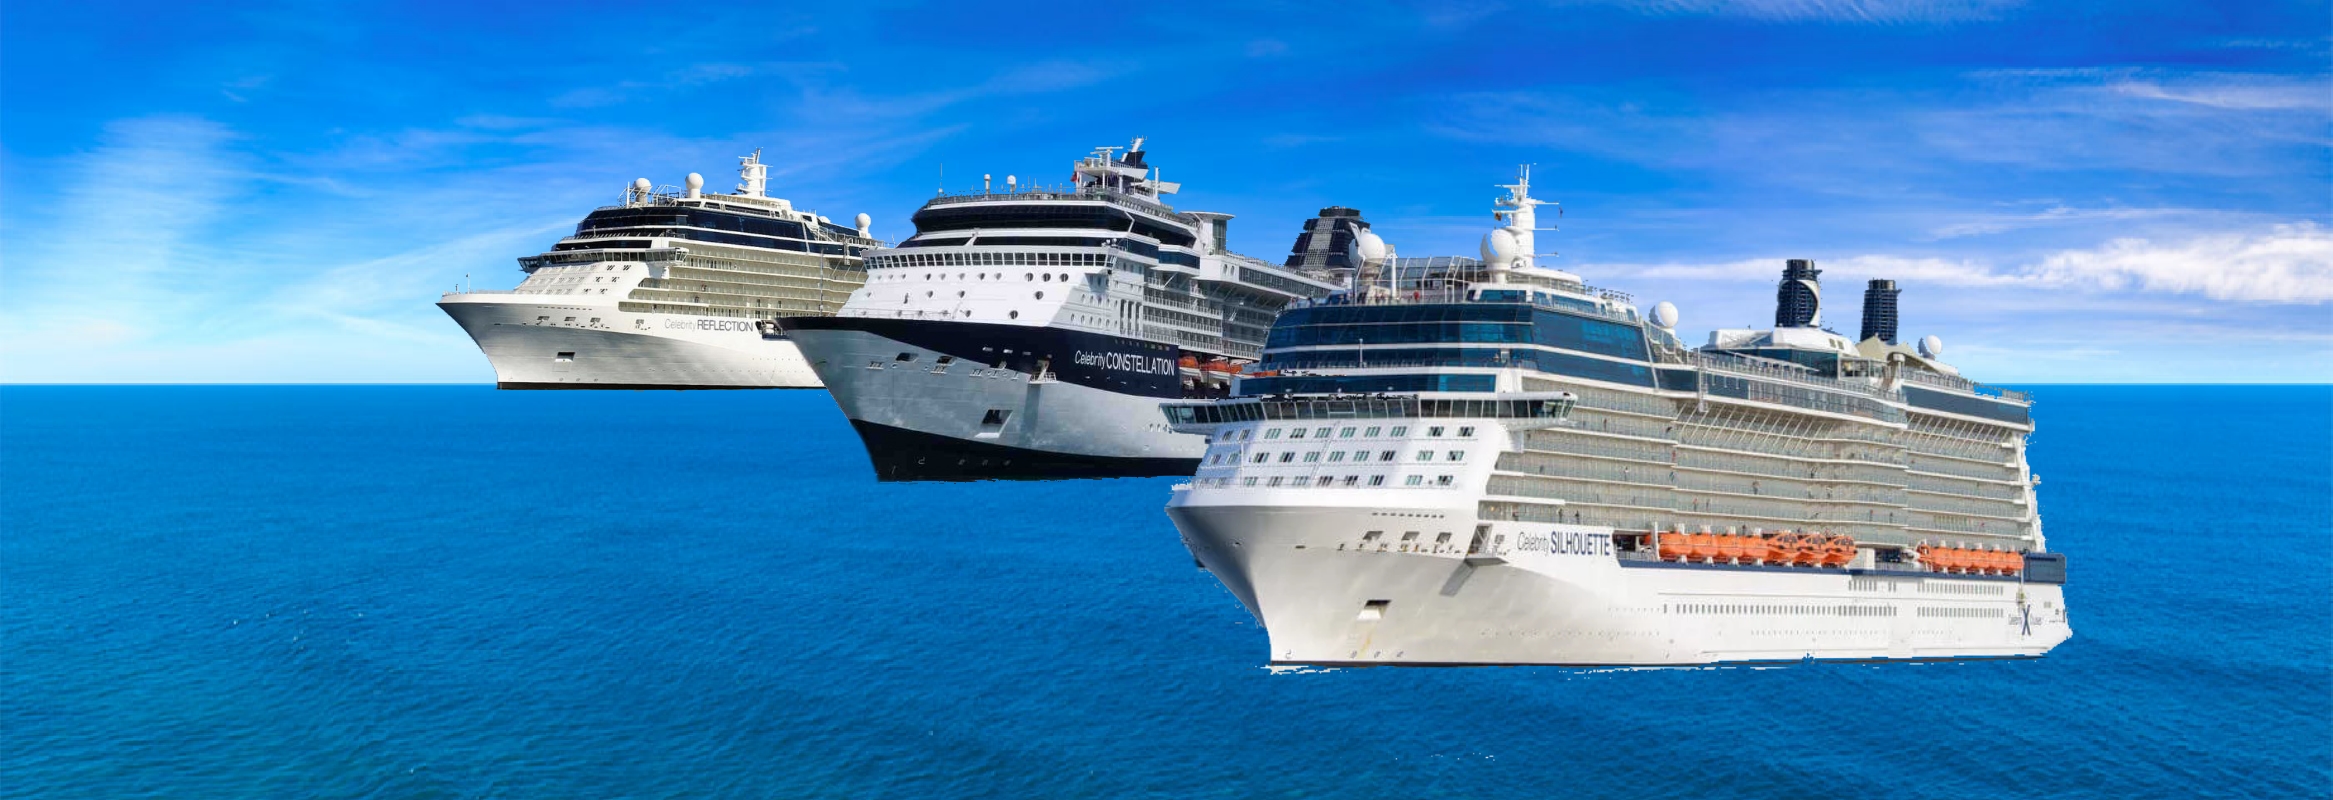 celebrity cruise excursion booking